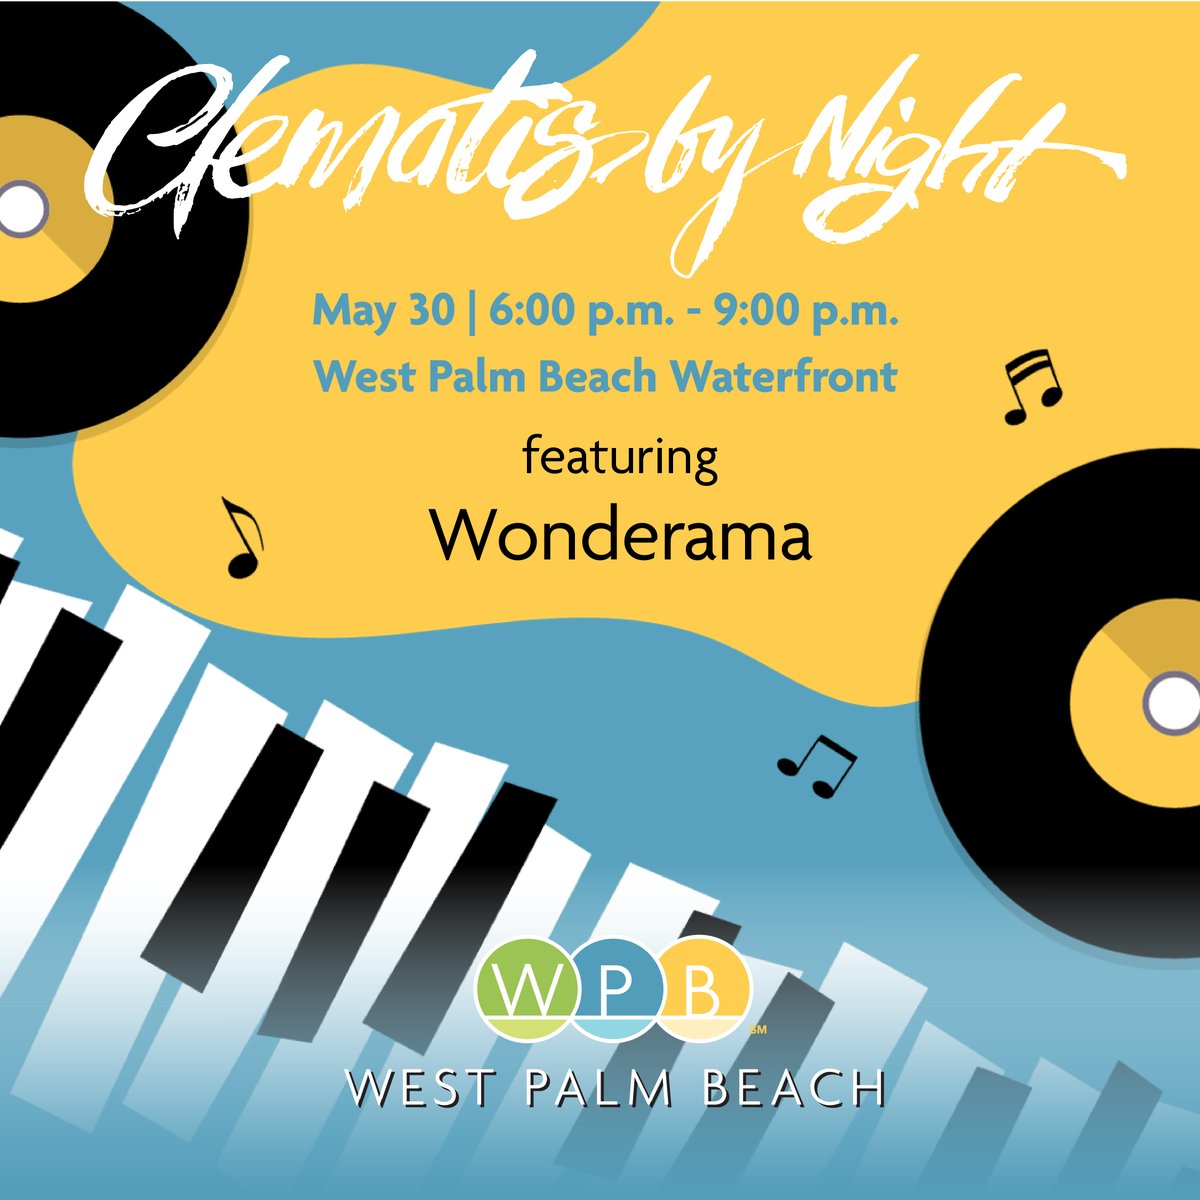 Any plans this Thursday? Now you do! Bring your friends and family to Clematis by Night and jam out to the Wonderama band! (Top 40/Pop)
📍100 N. Clematis St.
⏰6-9 p.m.
🎤Live entertainment every Thursday! #ClematisByNight #LiveMusic #WestPalmBeach #FreeEvents #ThingsToDoInWPB